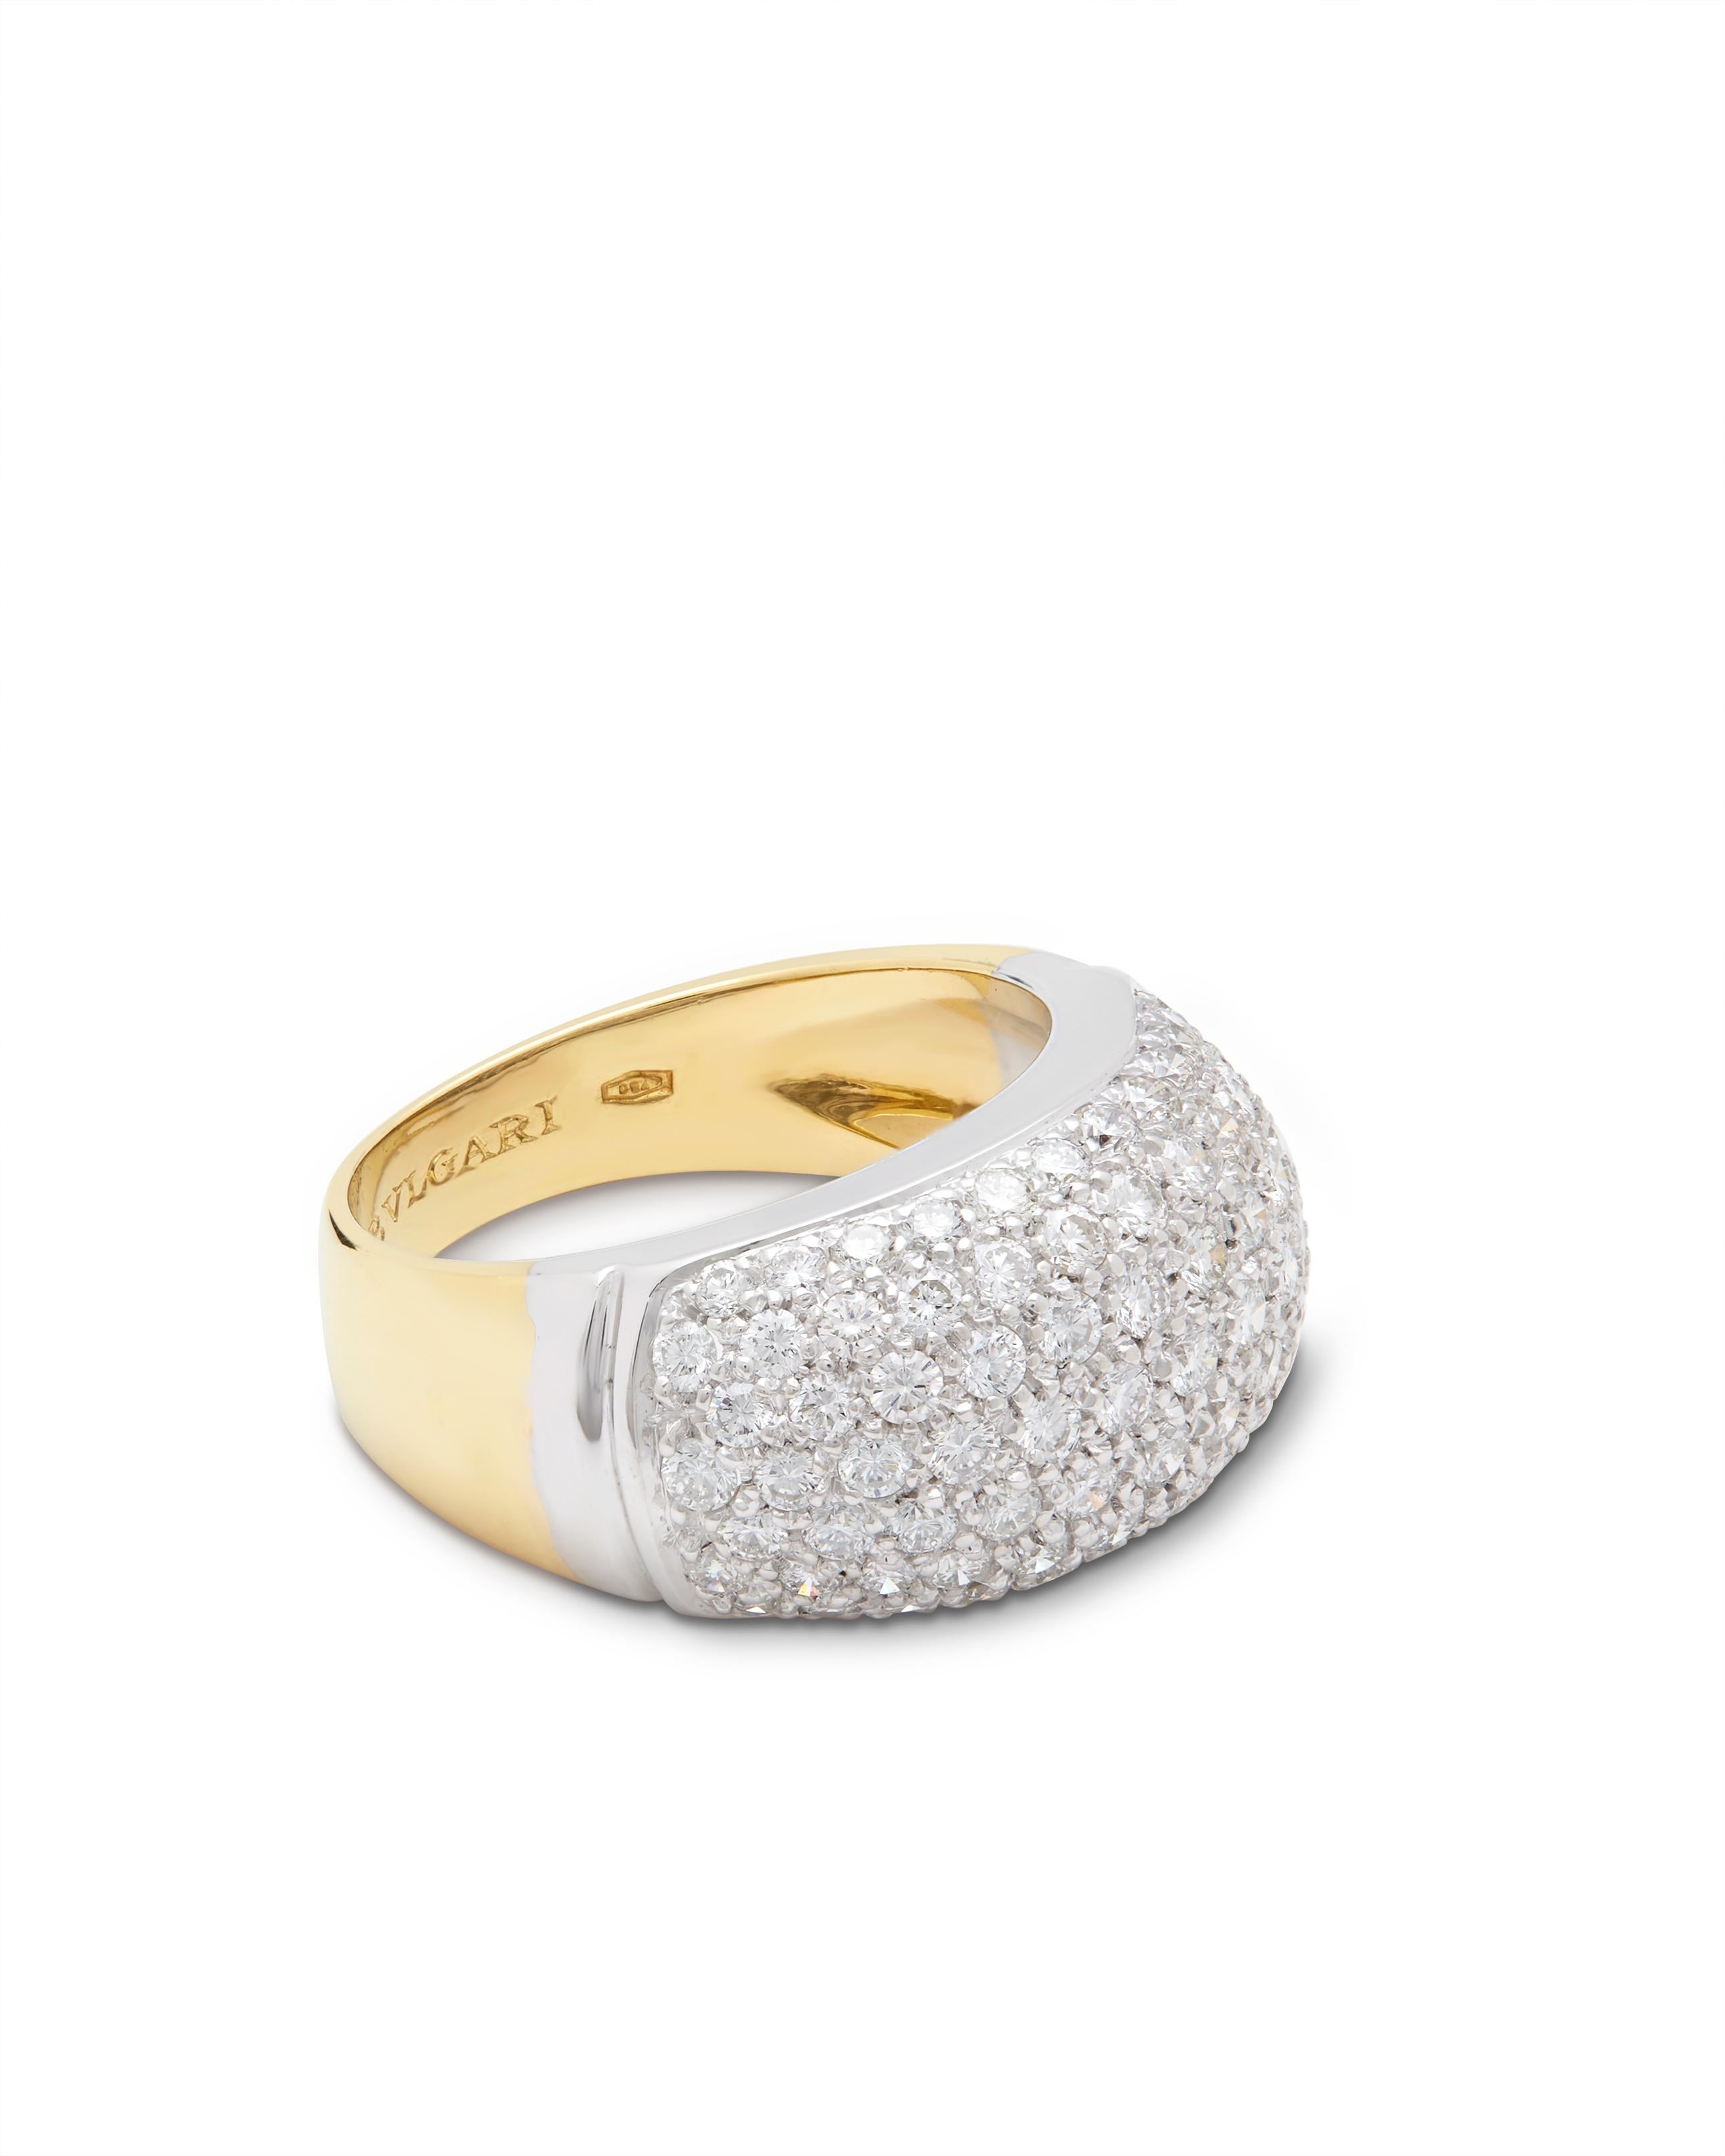 Pre-owned Bulgari Diamond Bombe ring Circa 1990-2000
An impressive Bulgari Diamond Bombe ring set in 18ct yellow and white gold.
A beautiful piece set with 1.60ct of total diamond weight.
Bulgari was founded in 1884 and has since become the powerful